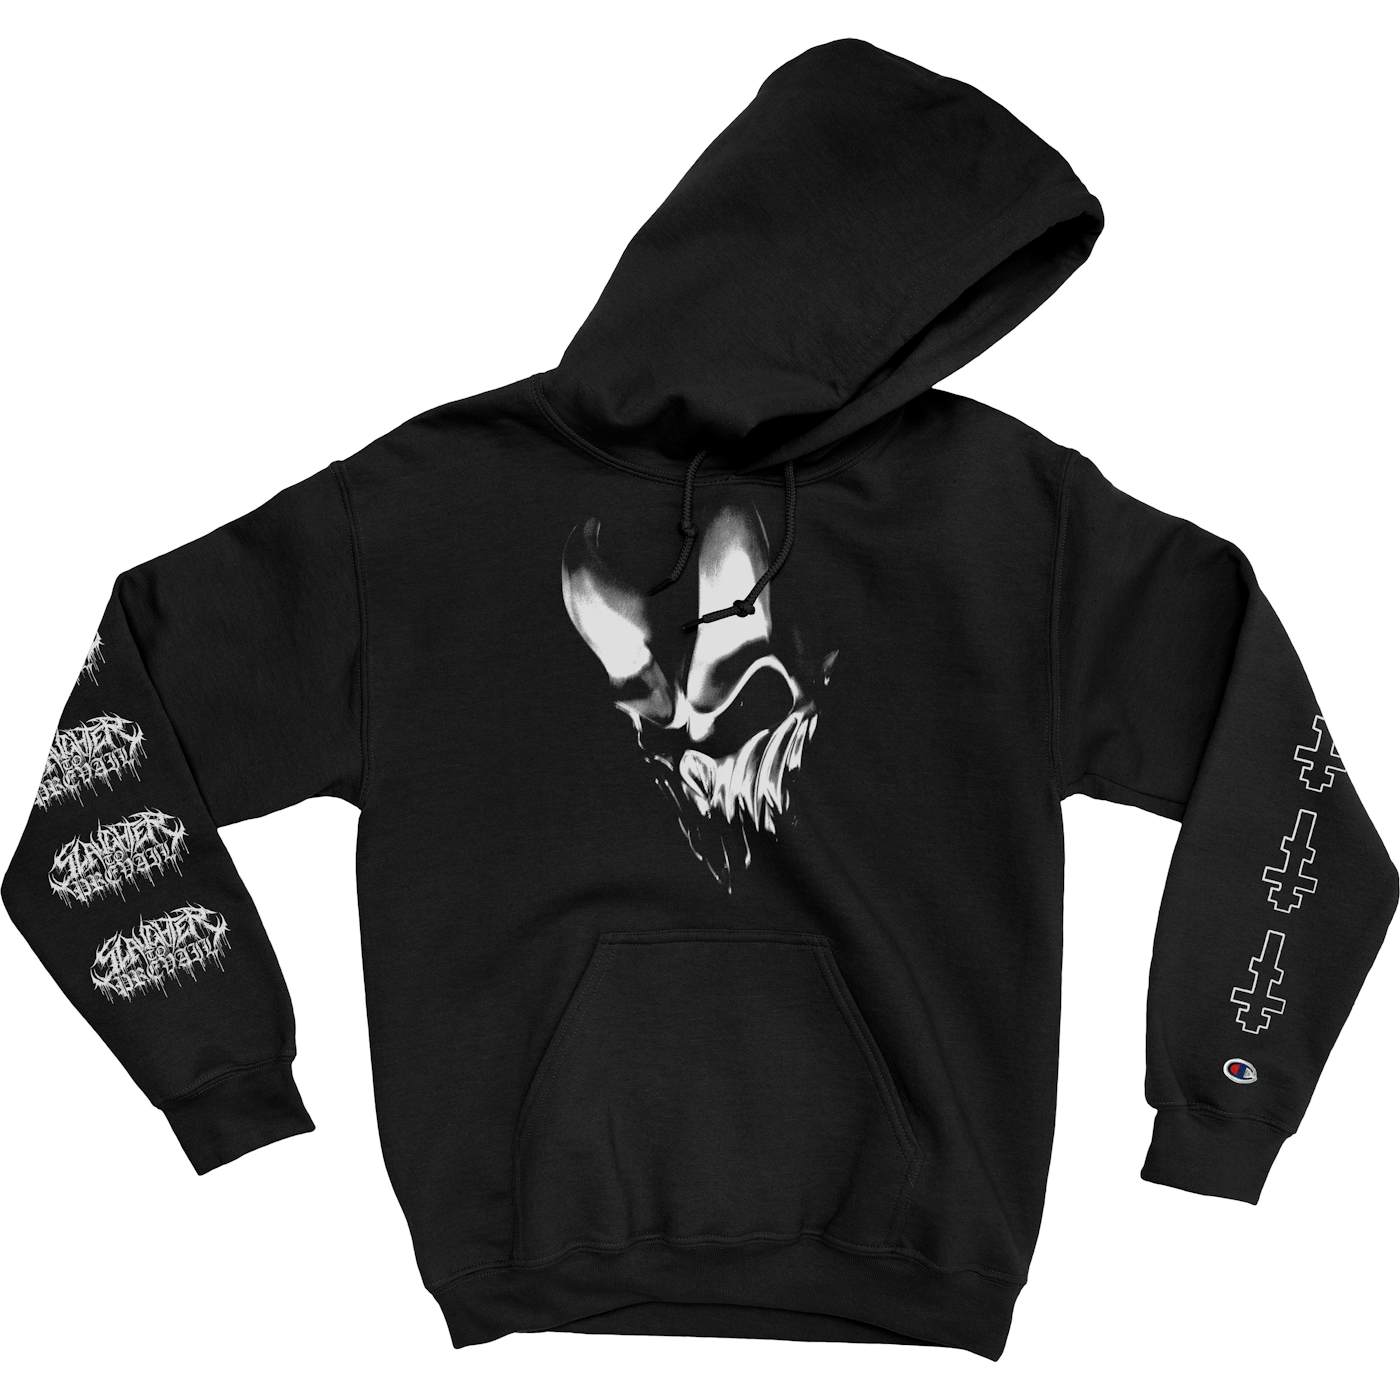 Slaughter To Prevail - 'Baba Yaga' Champion Pullover (Black)